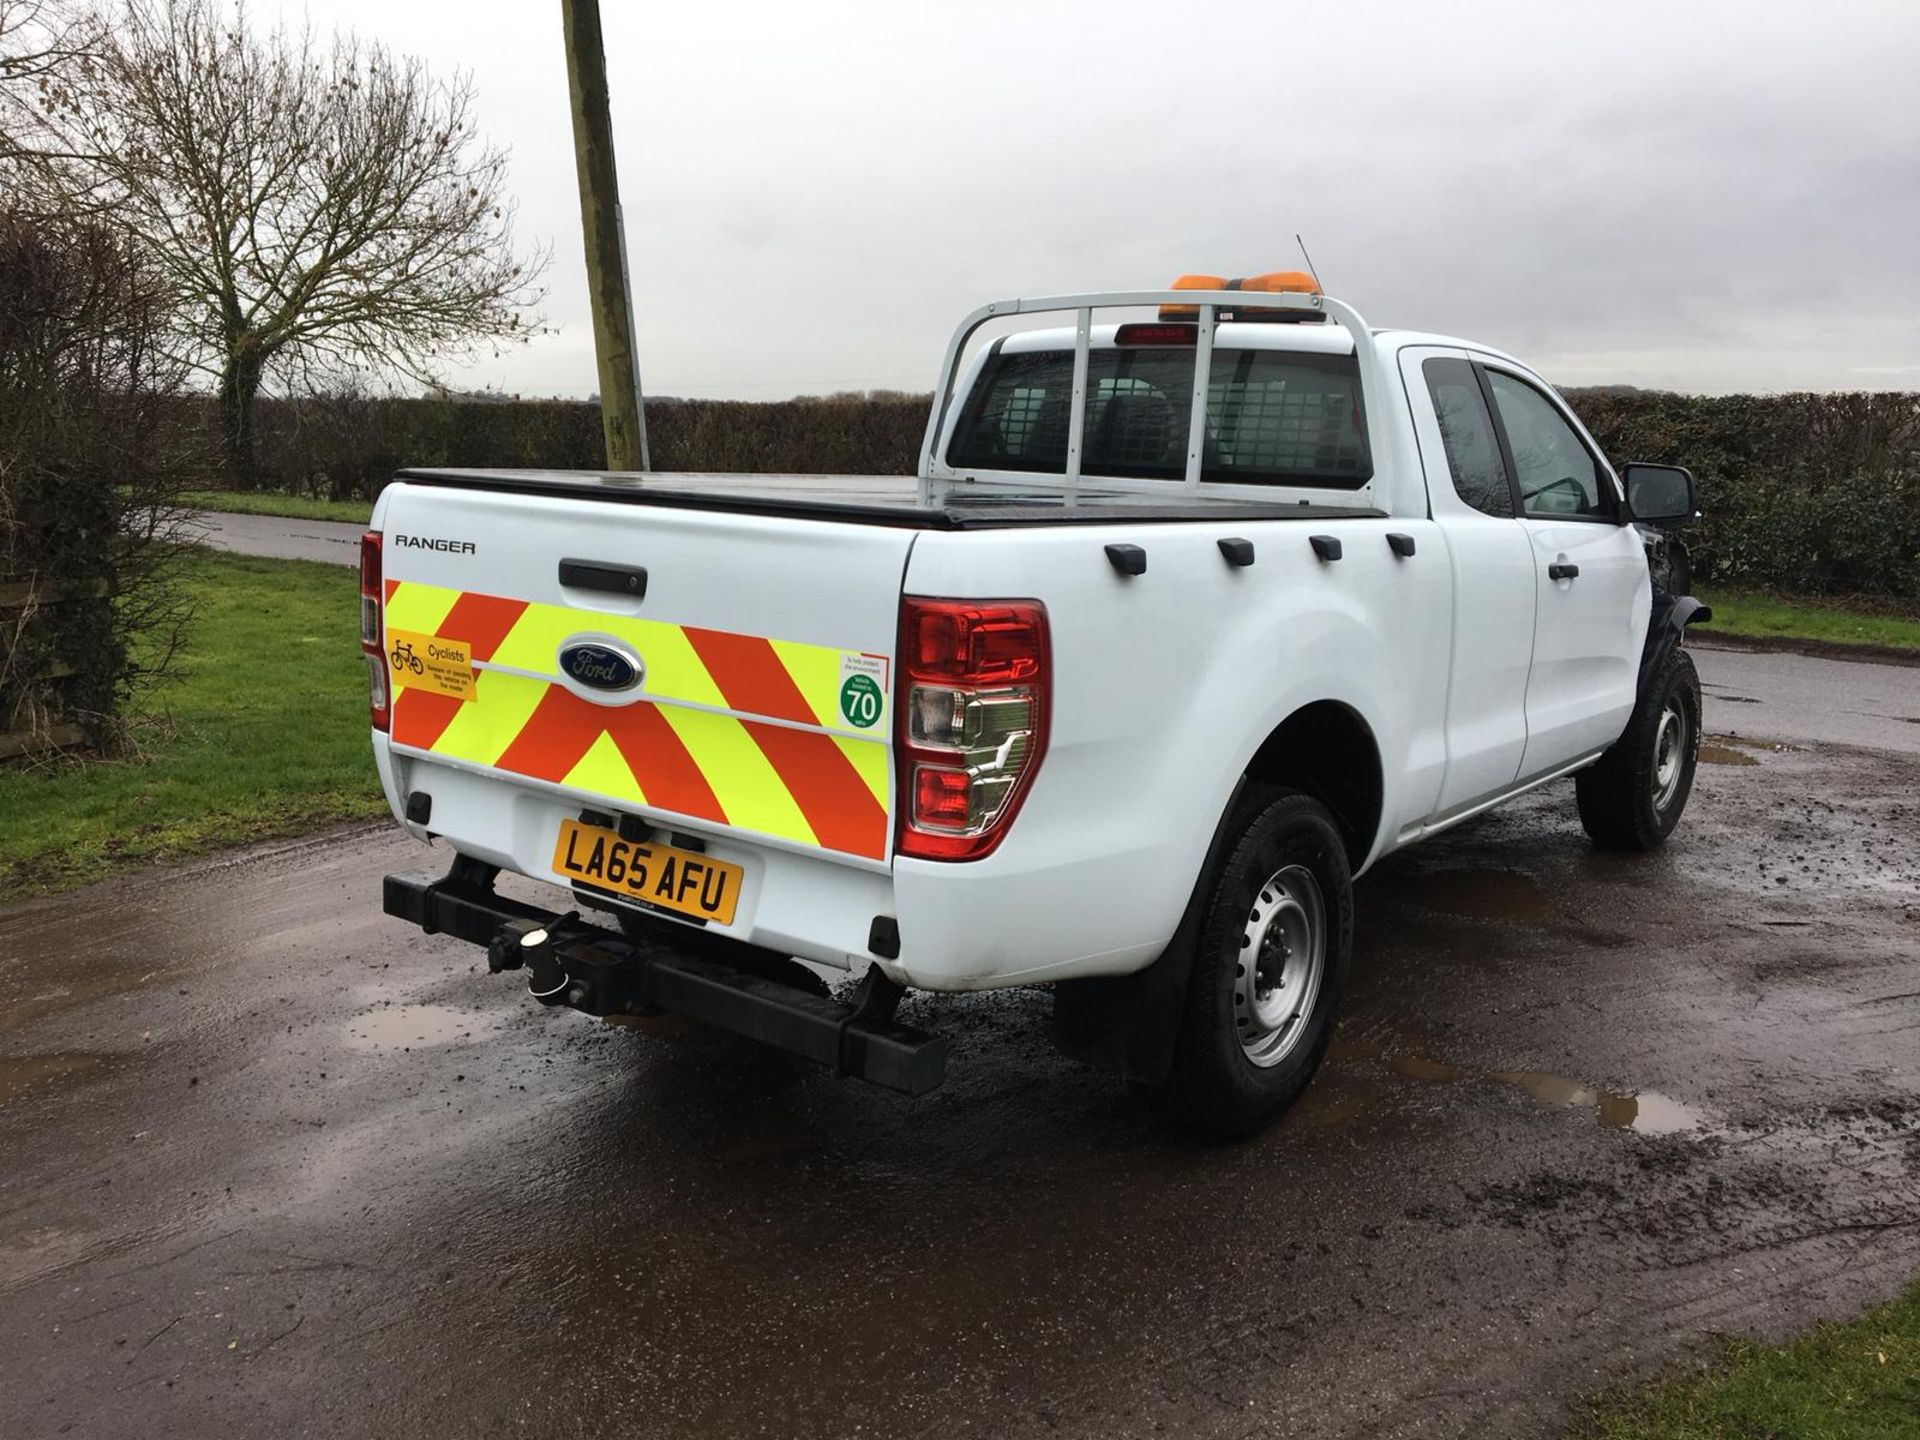 2016/65 REG FORD RANGER XL 4X4 DCB TDCI WHITE DIESEL PICK-UP, SHOWING 0 FORMER KEEPERS *NO VAT* - Image 6 of 12